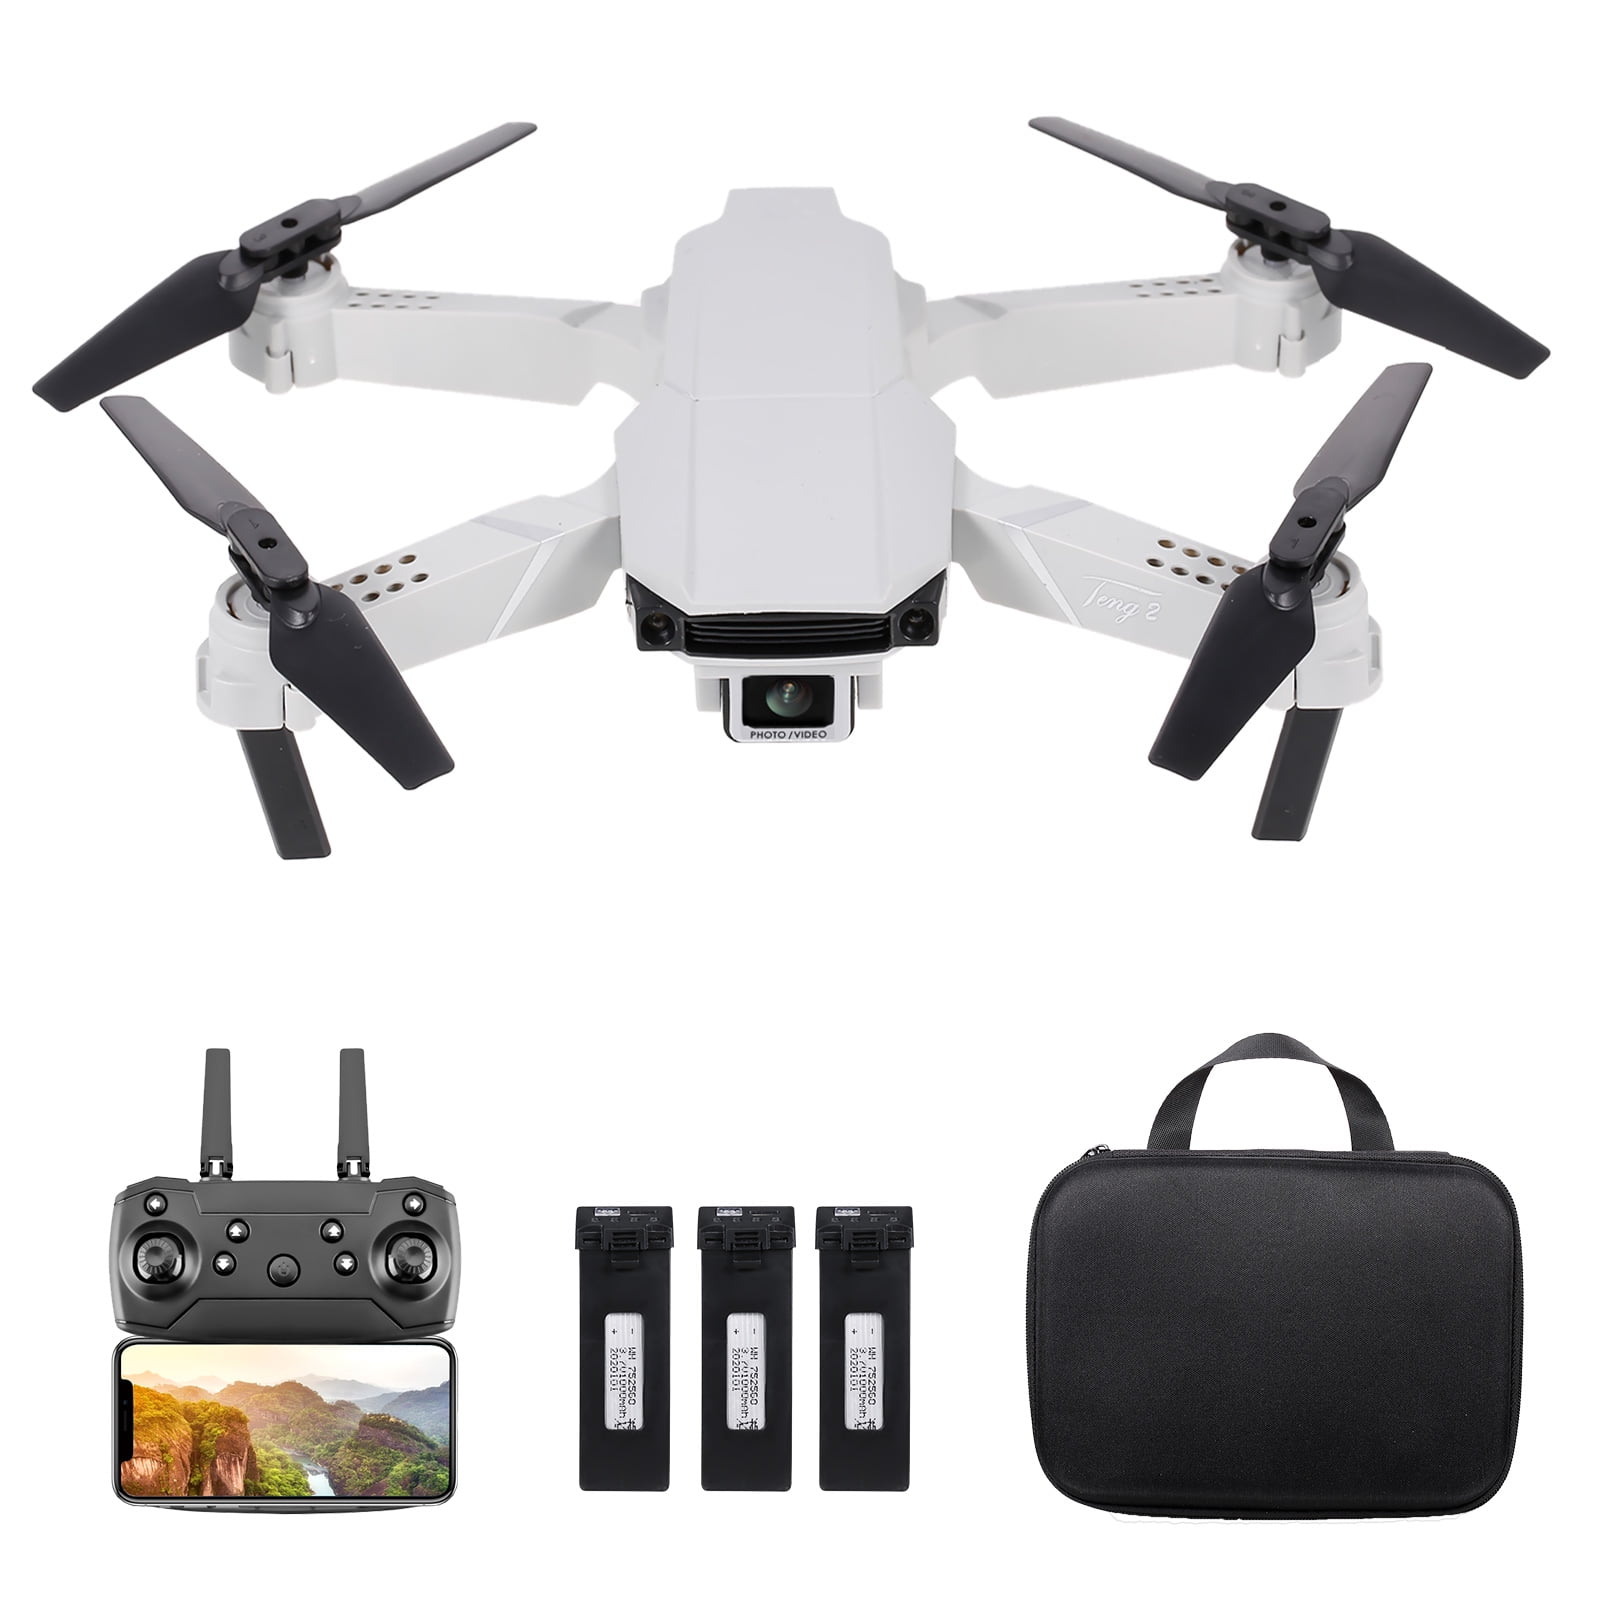 Details about   NEW FPV Wifi RC Drone With HD Camera Aircraft Foldable Quadcopter Selfie Toys 0 